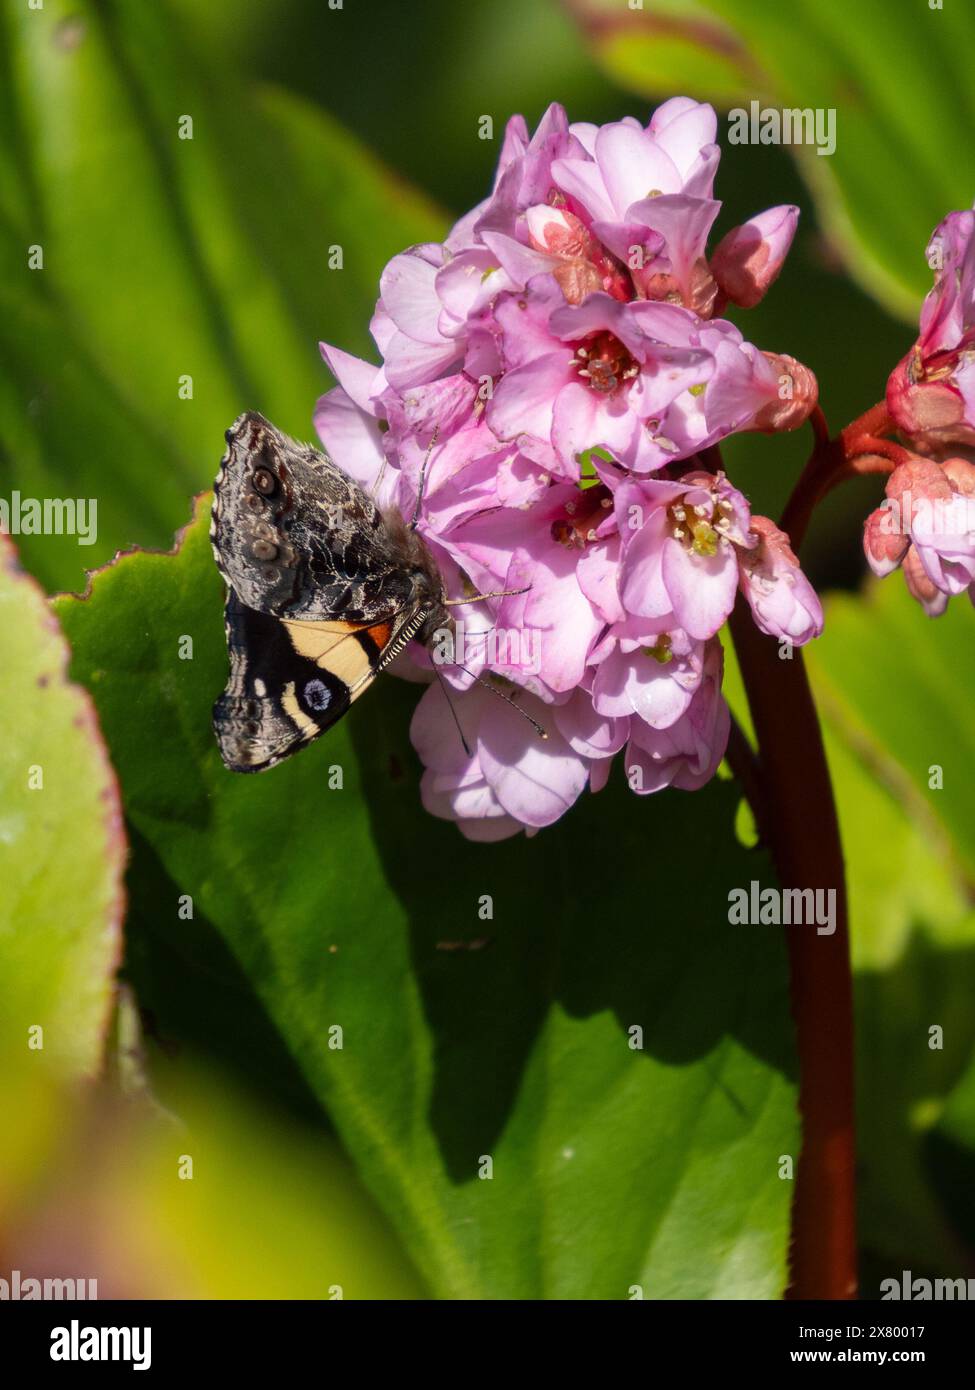 Vertical image of yellow admiral butterfly (Vanessa itea). It is feeding on a cluster of pink bergenia flowers. Stock Photo